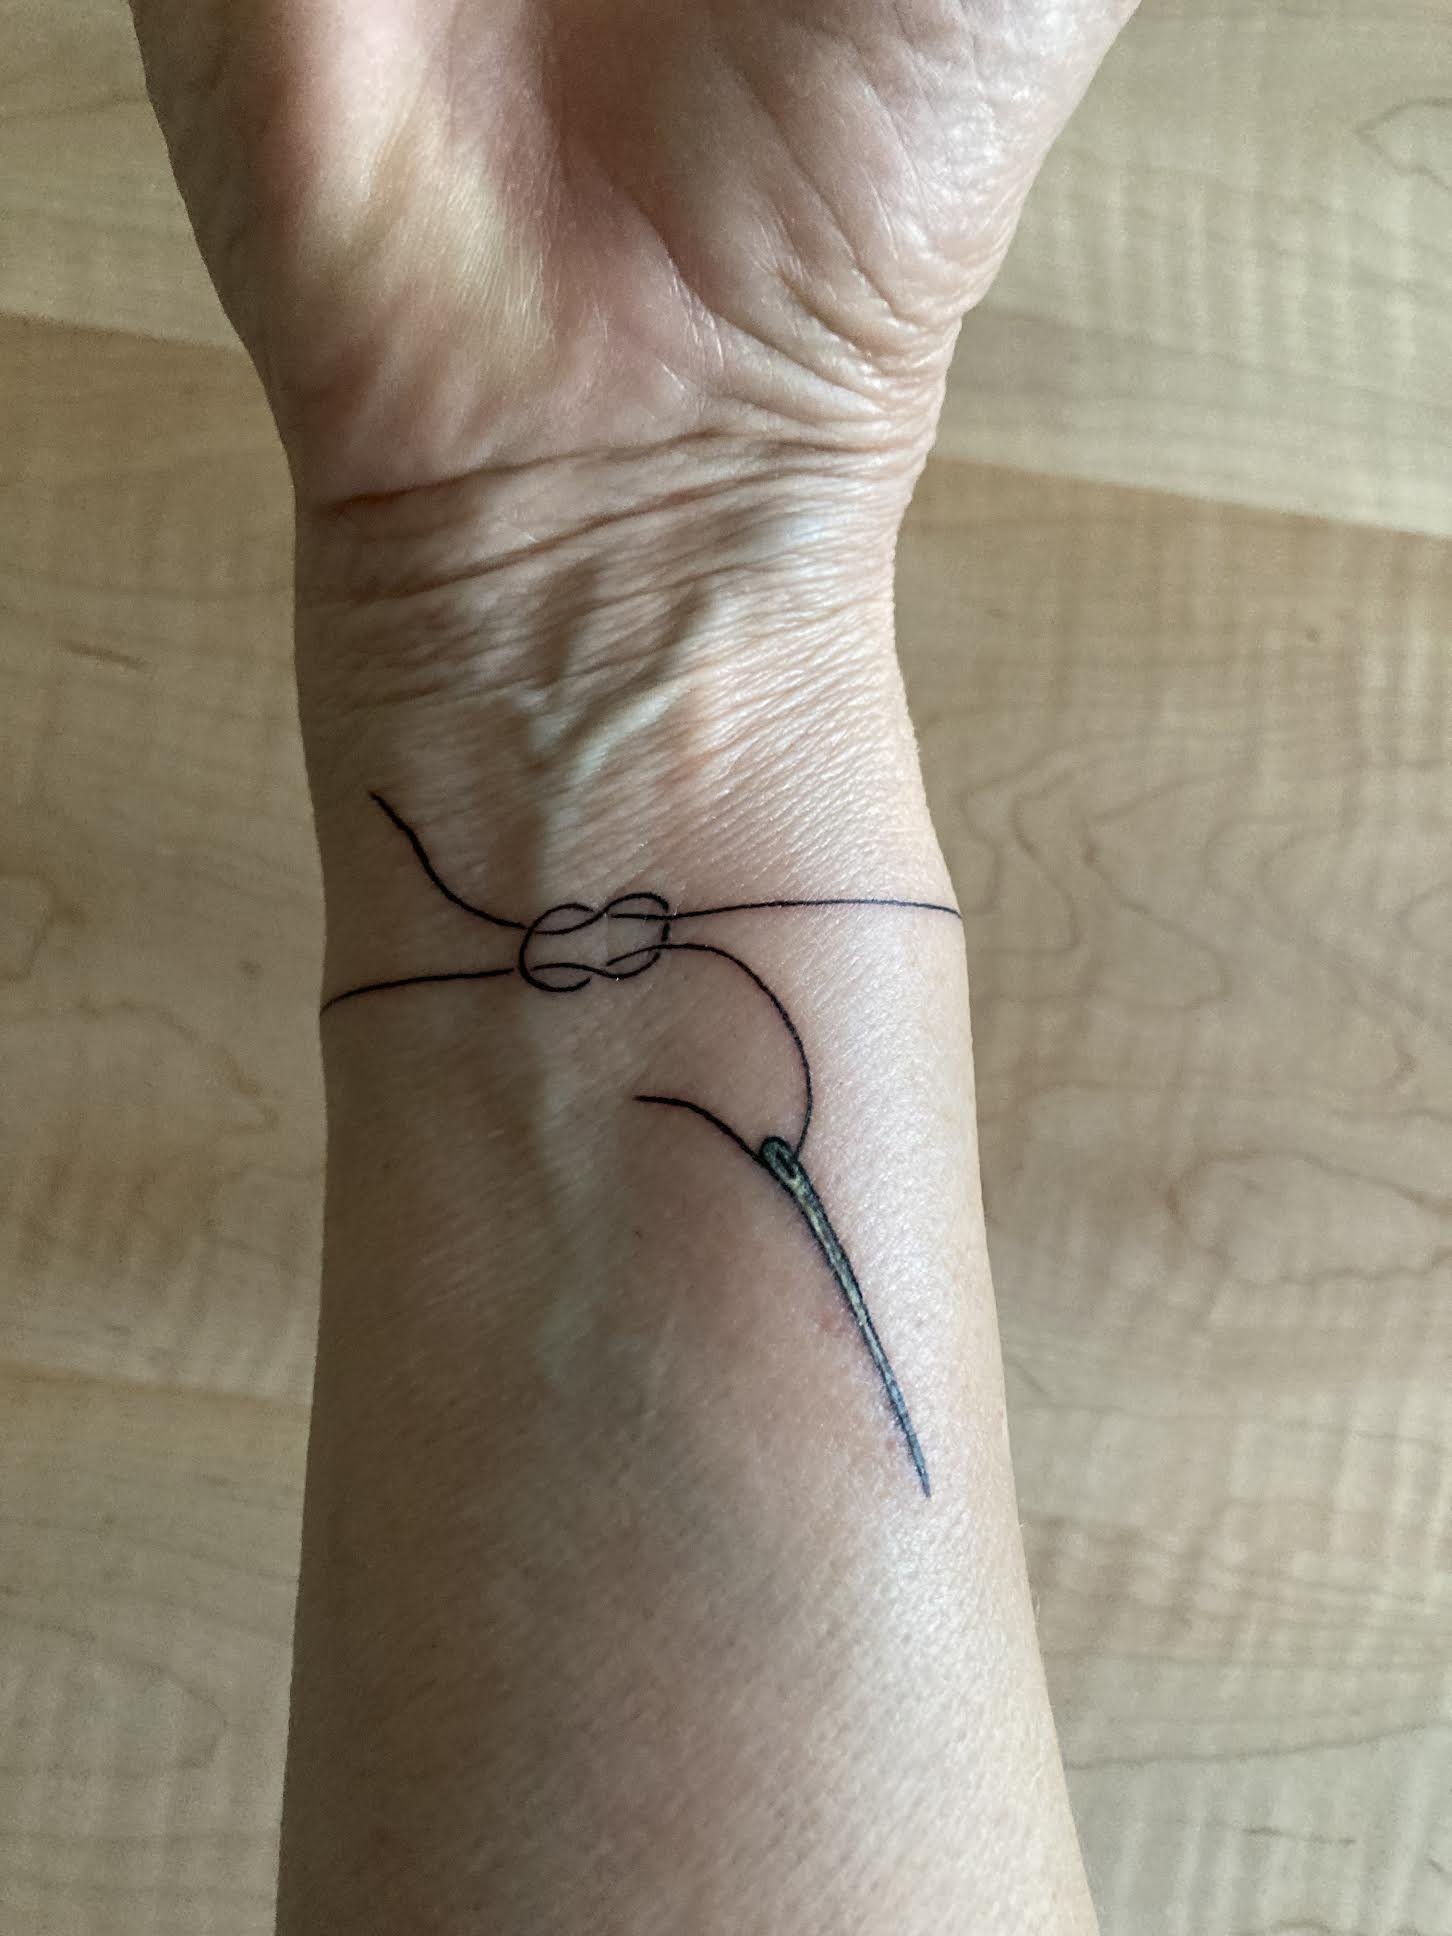 The Complete StickandPoke Tattoo Guide for Newbies